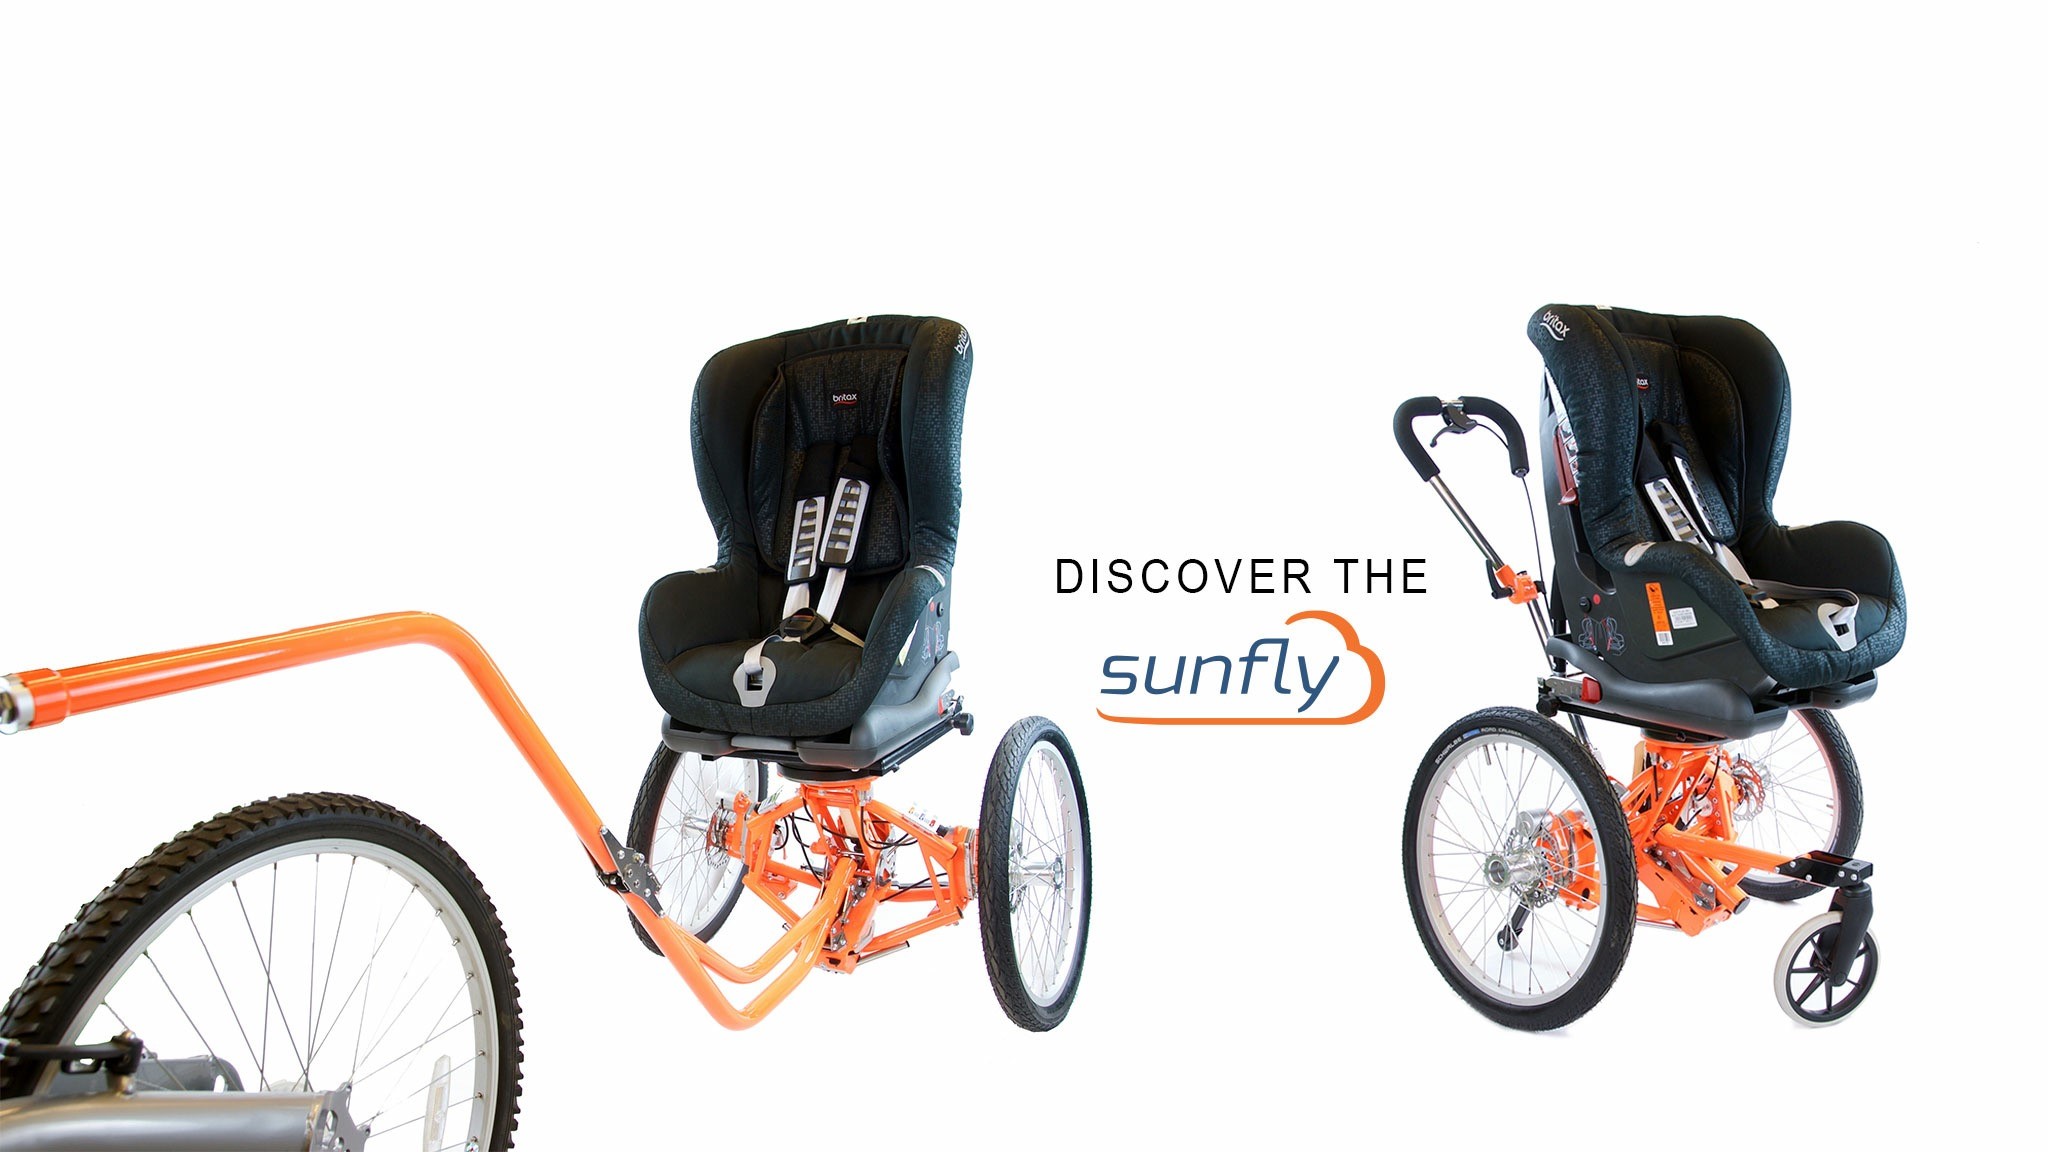 Sunfly Trailer Chair is here